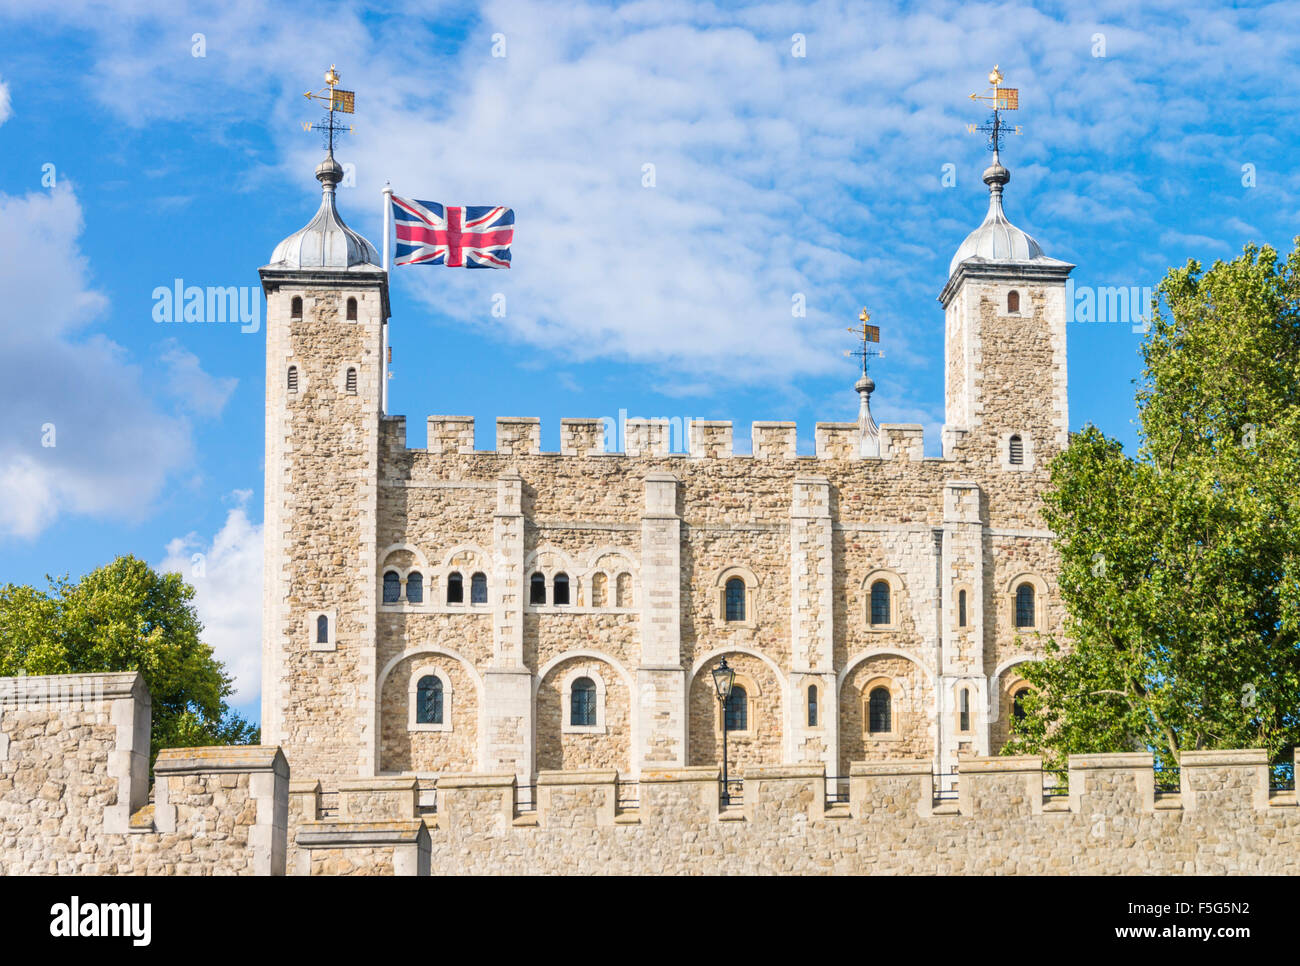 The white tower and castle walls Tower of London view City of London England GB UK EU Europe Stock Photo